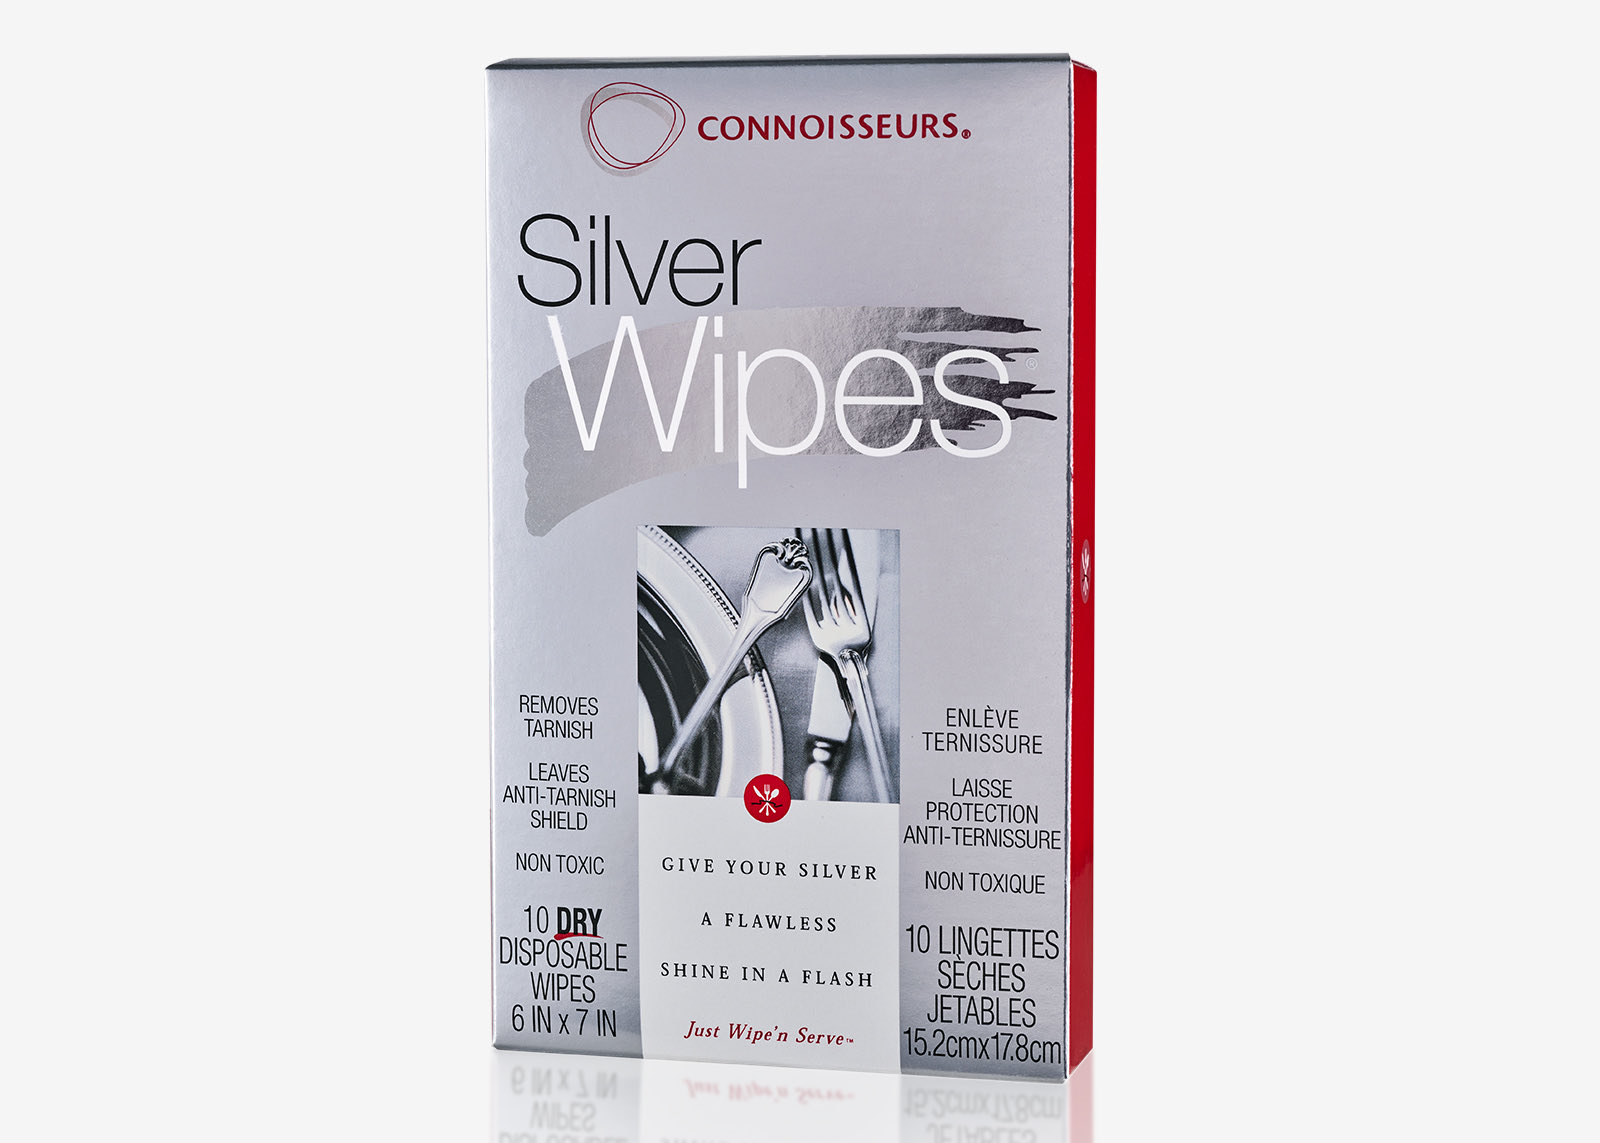 Connoisseurs Jewelry Wipes Gold and Silver Cleaner 25 Count - 3